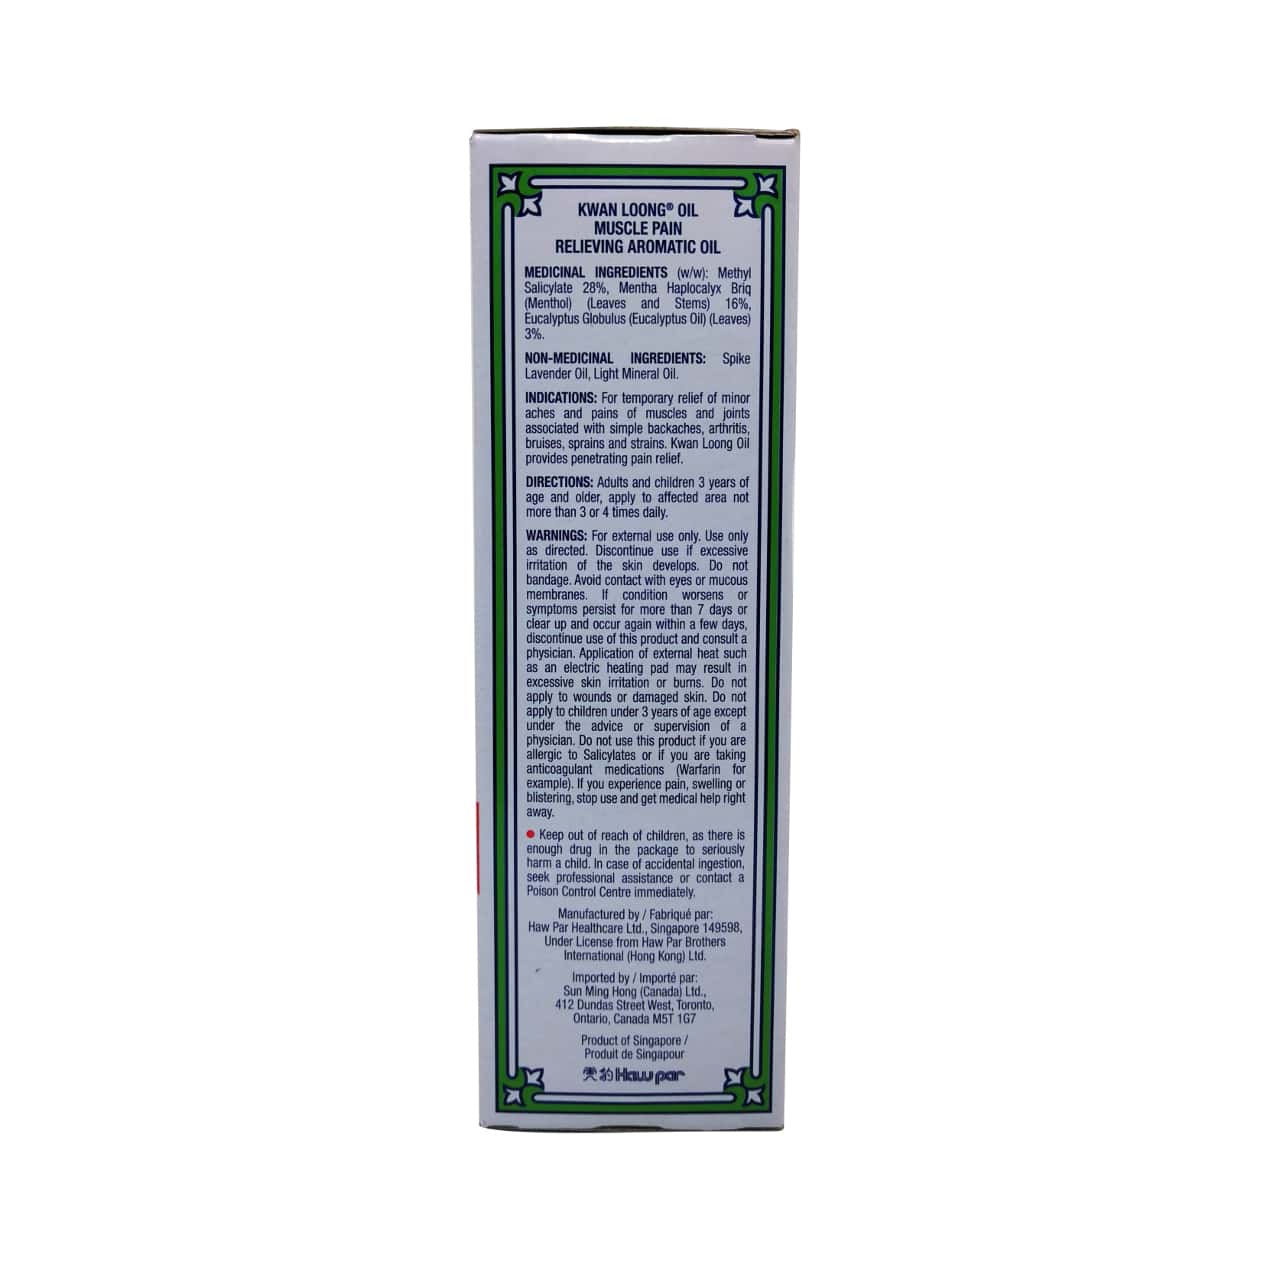 Ingredients, indications, directions, and warnings for Kwan Loong Pain Relieving Aromatic Oil in English